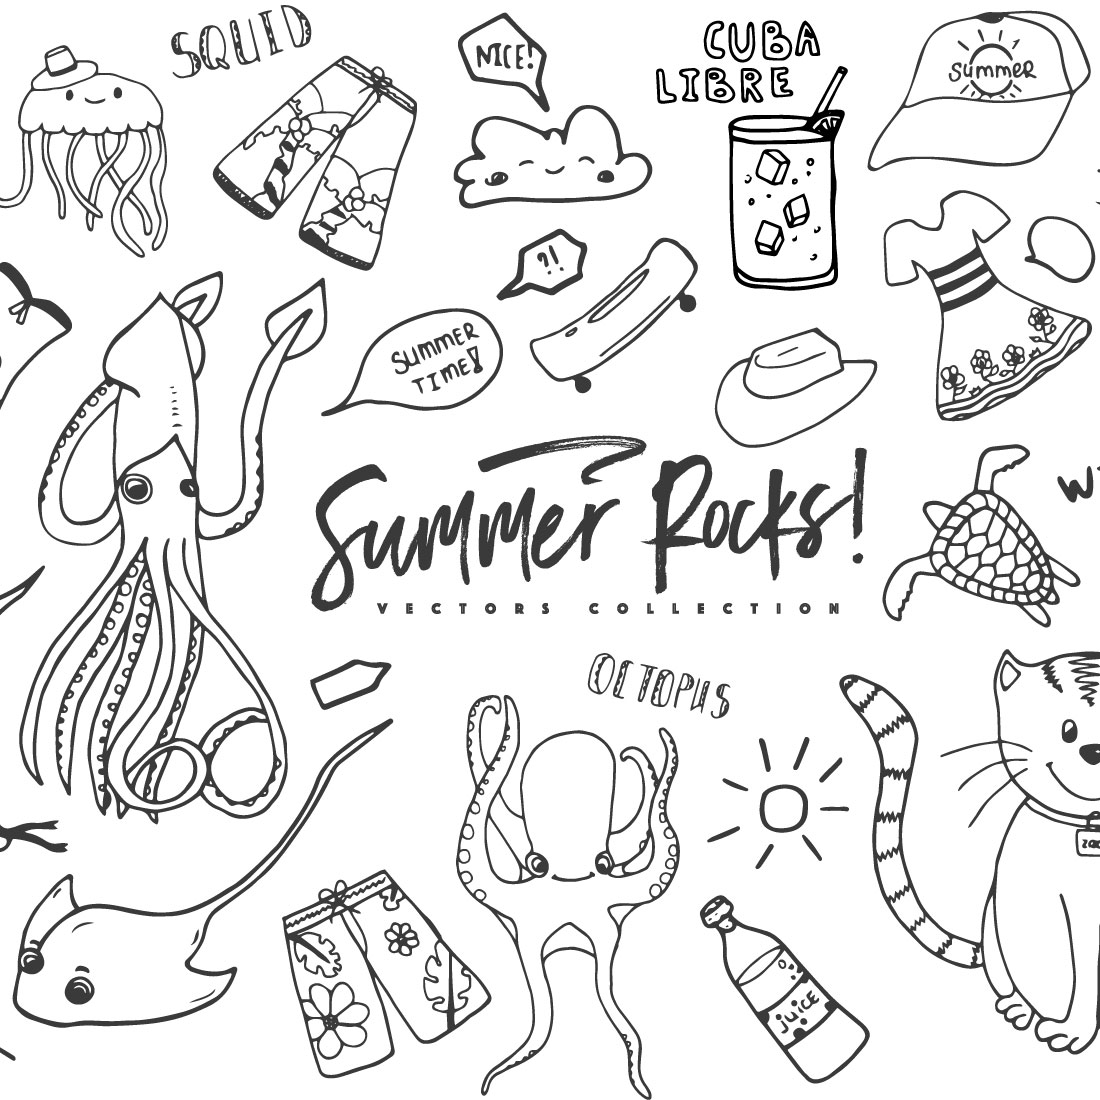 Summer Rocks Vectors Collection preview image.